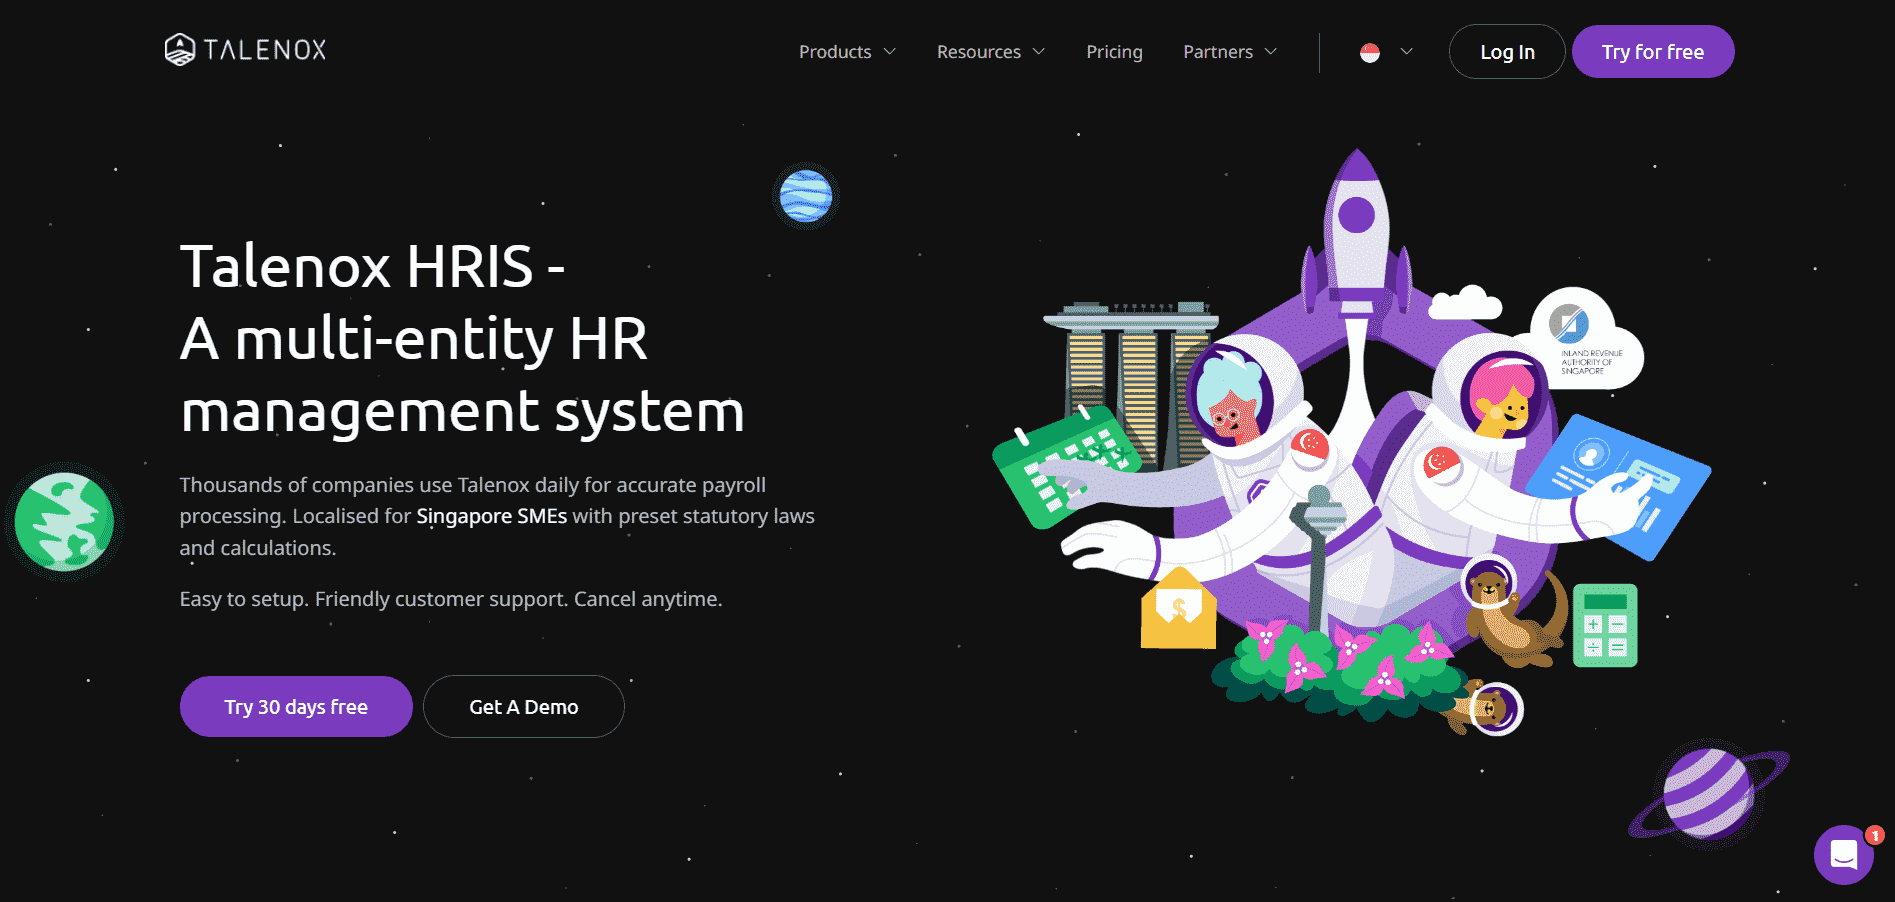 Homepage of Talenox mentioning 'a multi-entity HR management system' and space theme human avatar